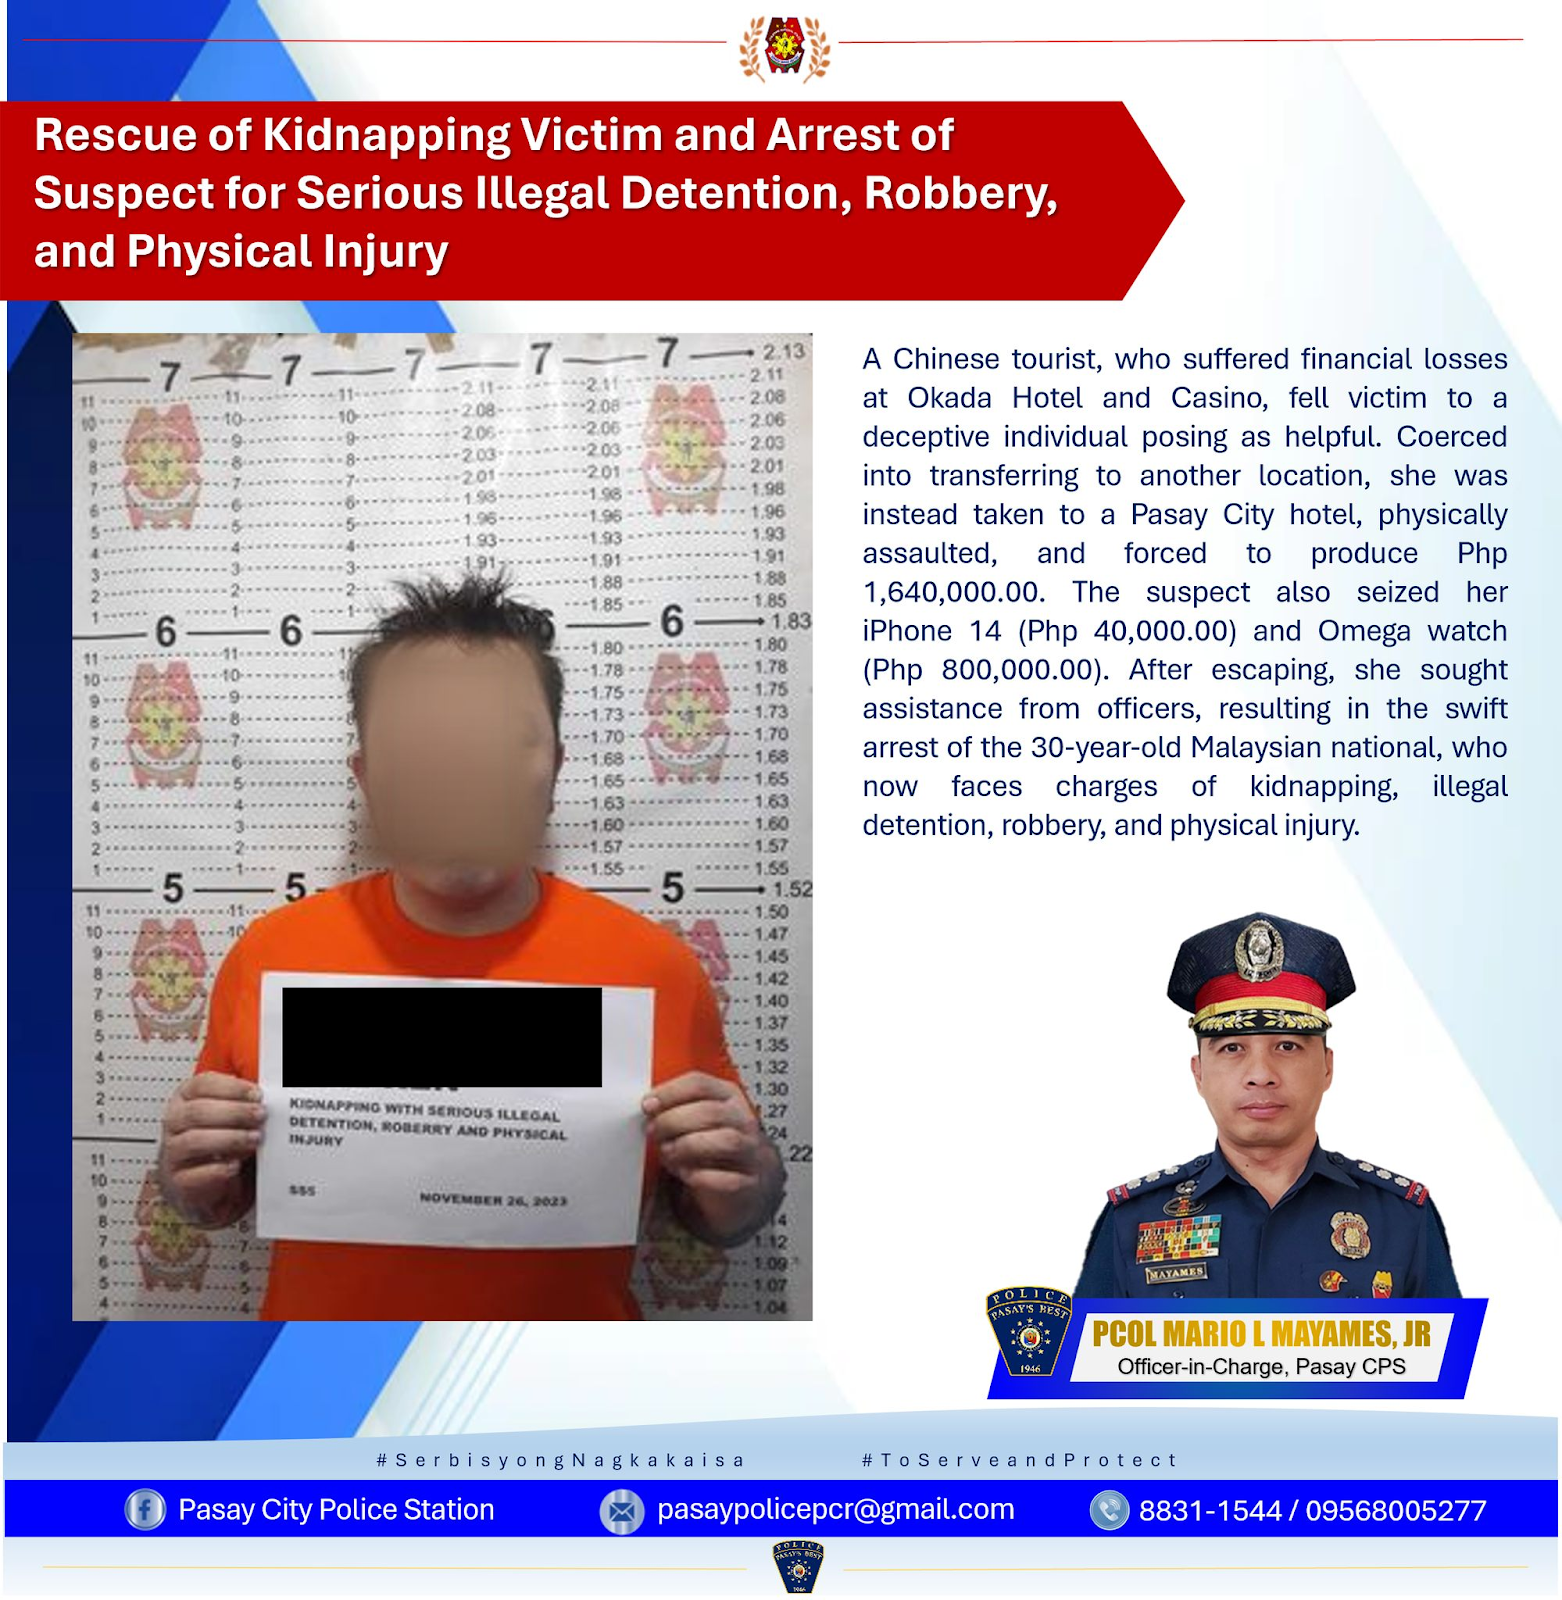   Photo Caption: Pasay City police arrest a 30-year-old Malaysian man for kidnapping and other offenses on November 26, 2023. (Photo from Pasay City Police Station)